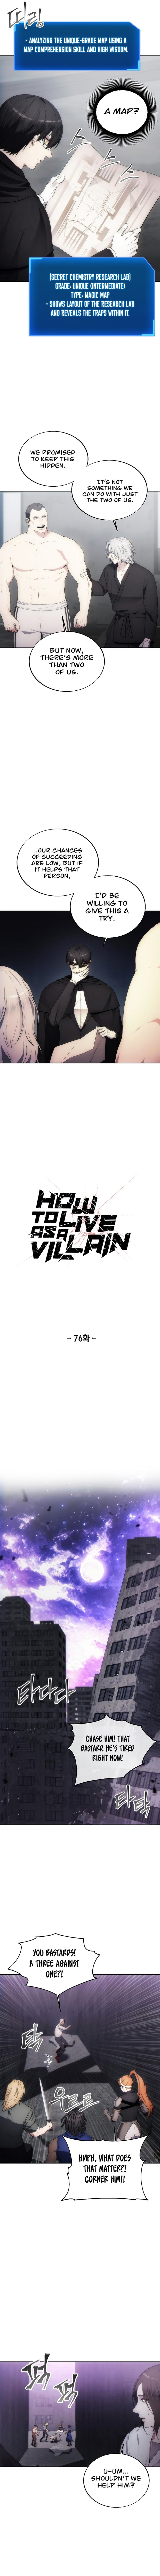 How To Live As A Villain 76 5